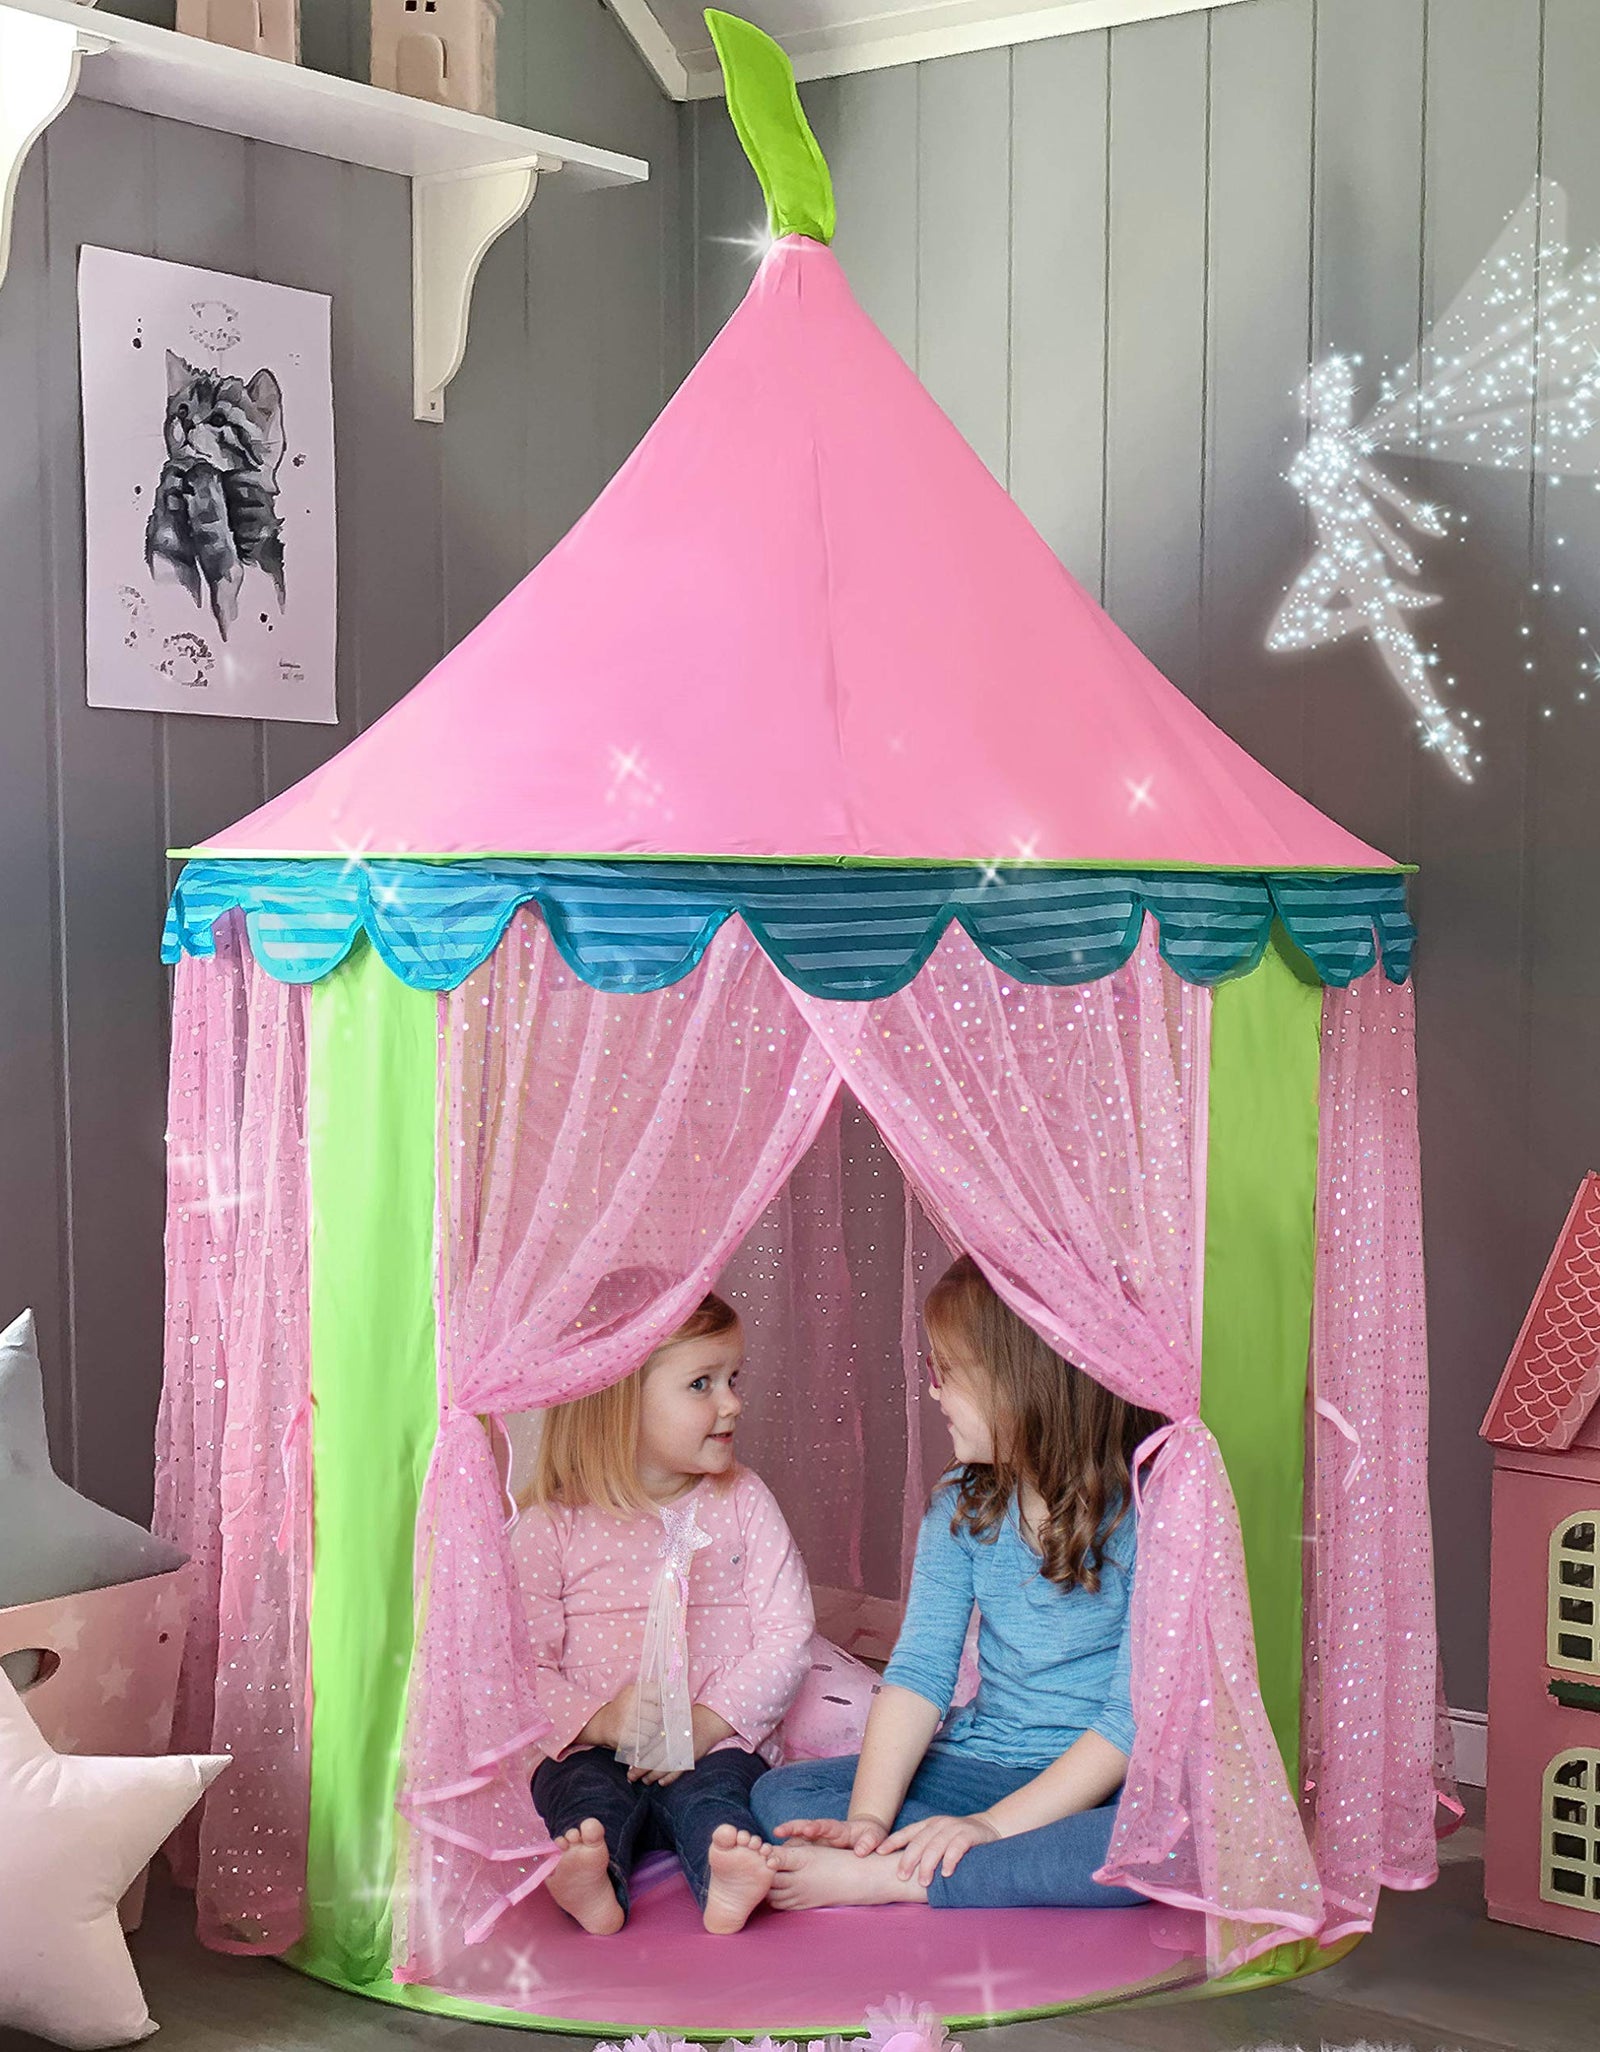 Tiny Land Princess Castle Play Tent With Glitter Dot, Pack in A Carrying Case, 2 Kids Foldable Pop Up Pink Play Tent/House Toy For Indoor and Outdoor Use, 41"Dx 55“H